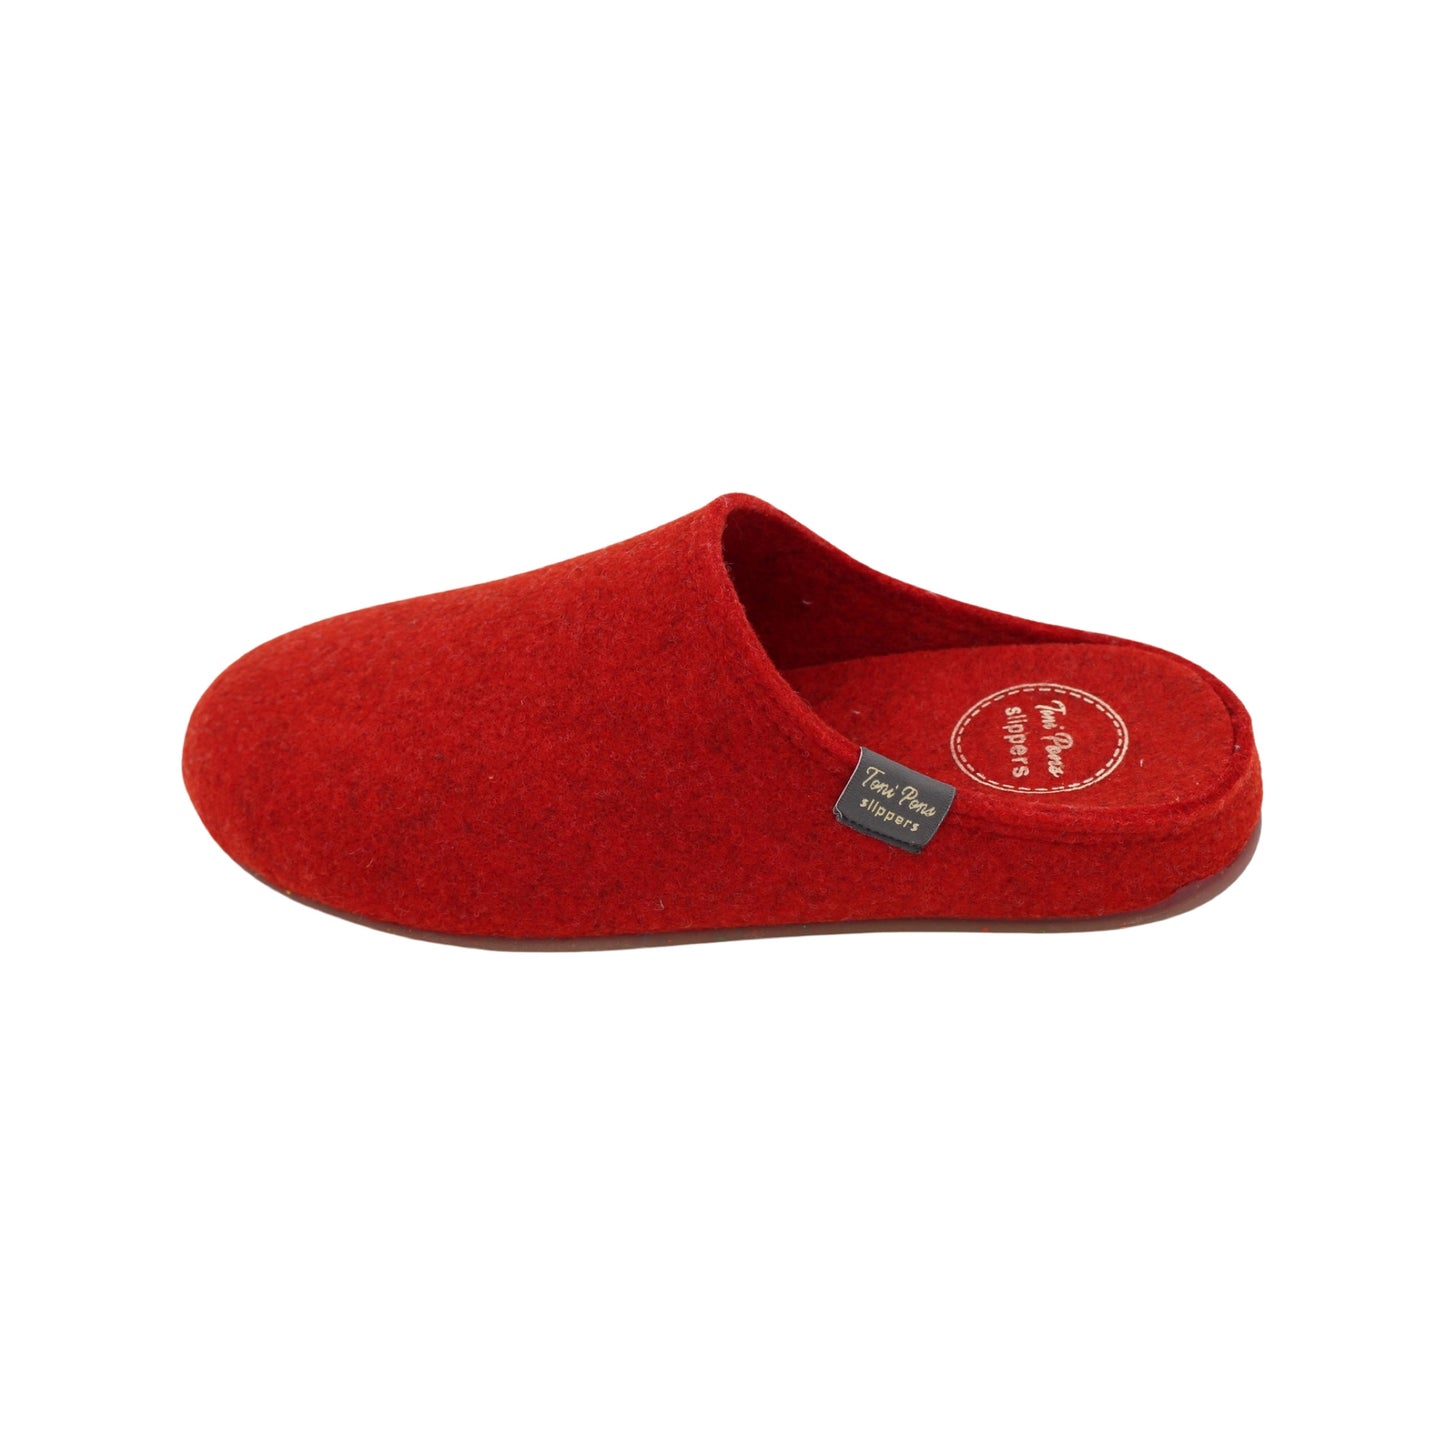 Toni Pons House Shoes  Red